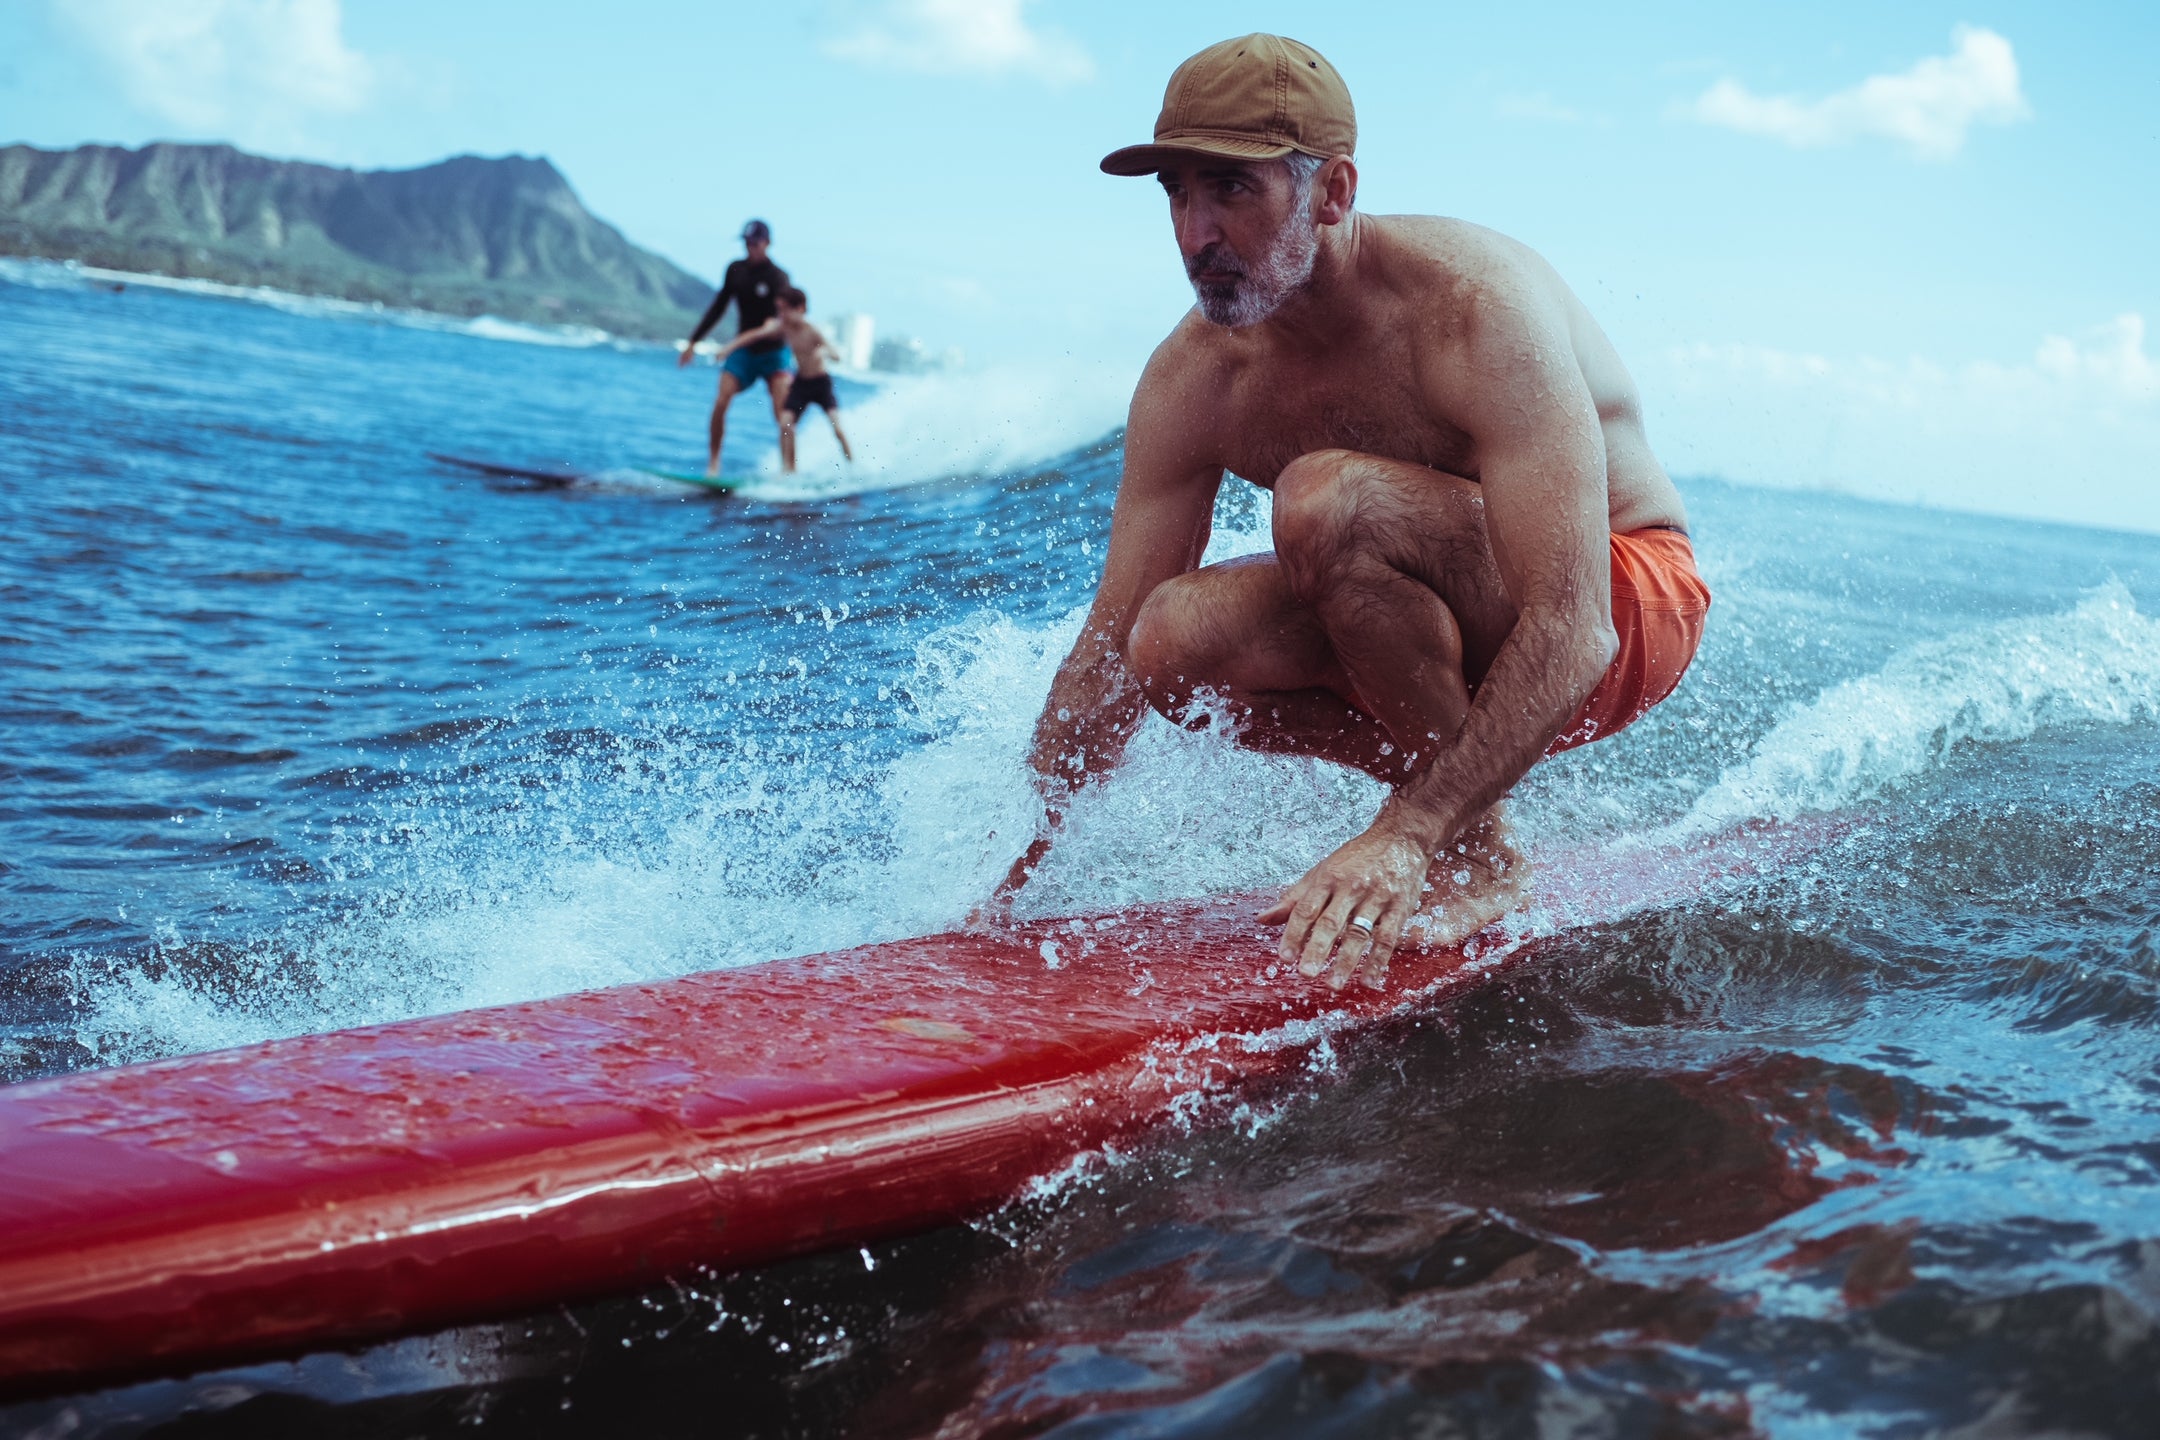 An Outsiders™ Interview with Chris Gentile, founder of Pilgrim Surf & Supply